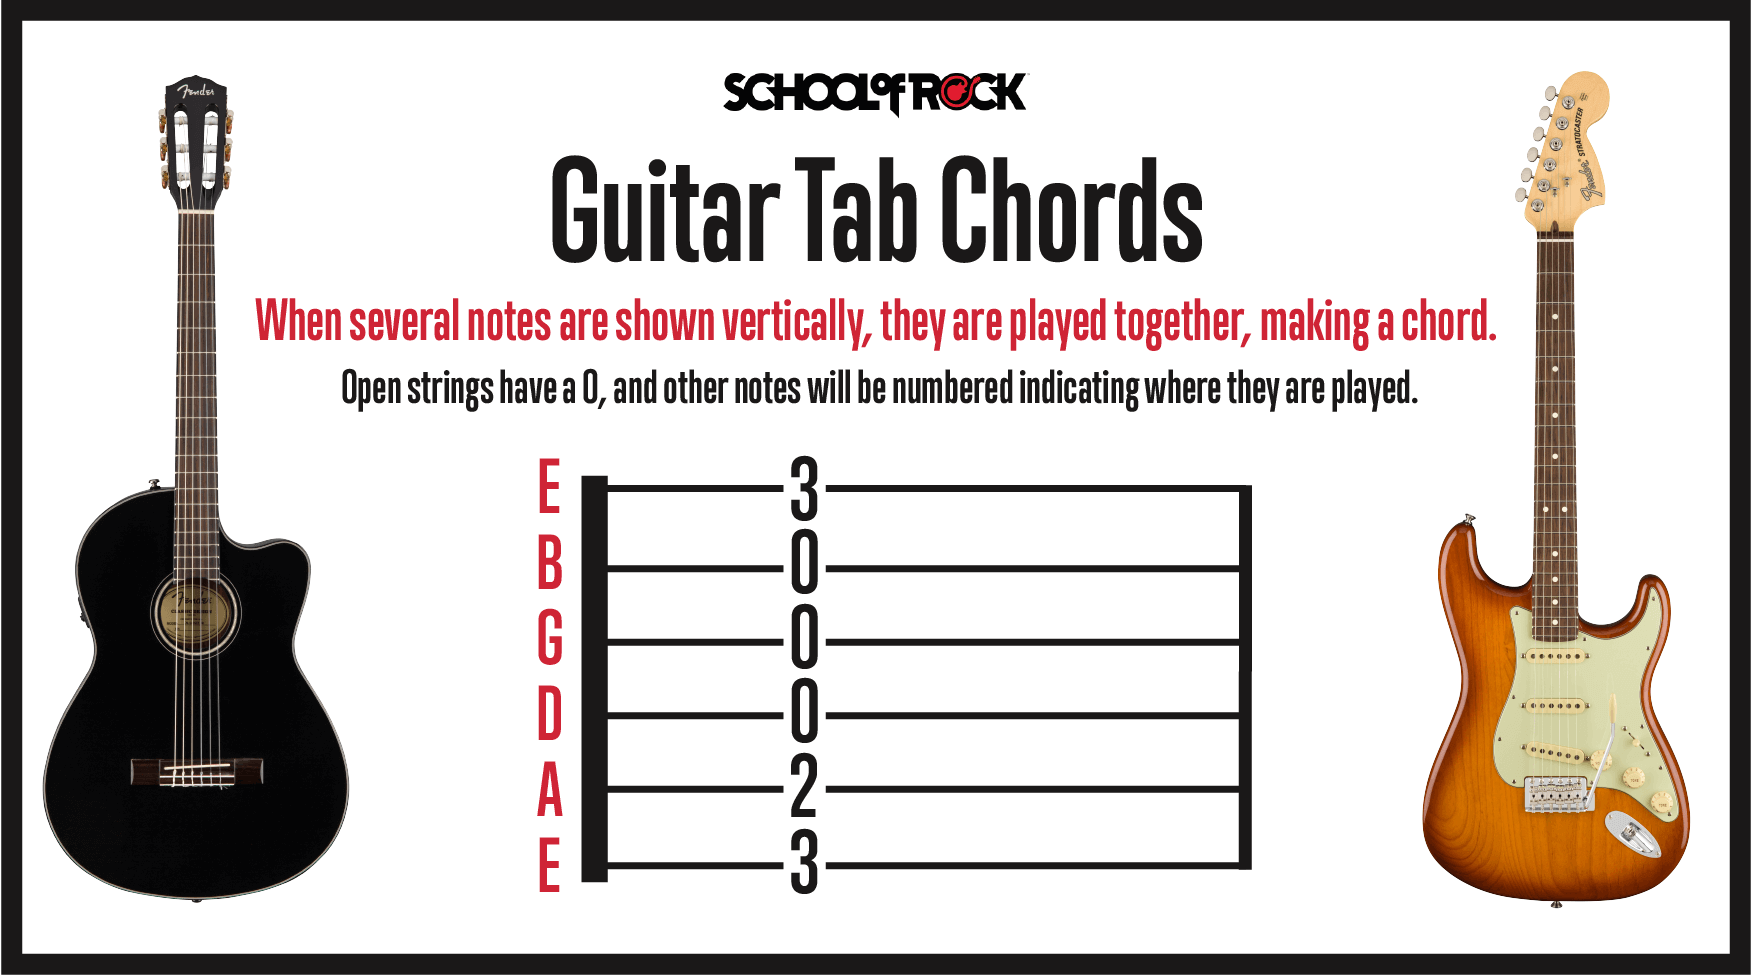 How to read guitar tab chords